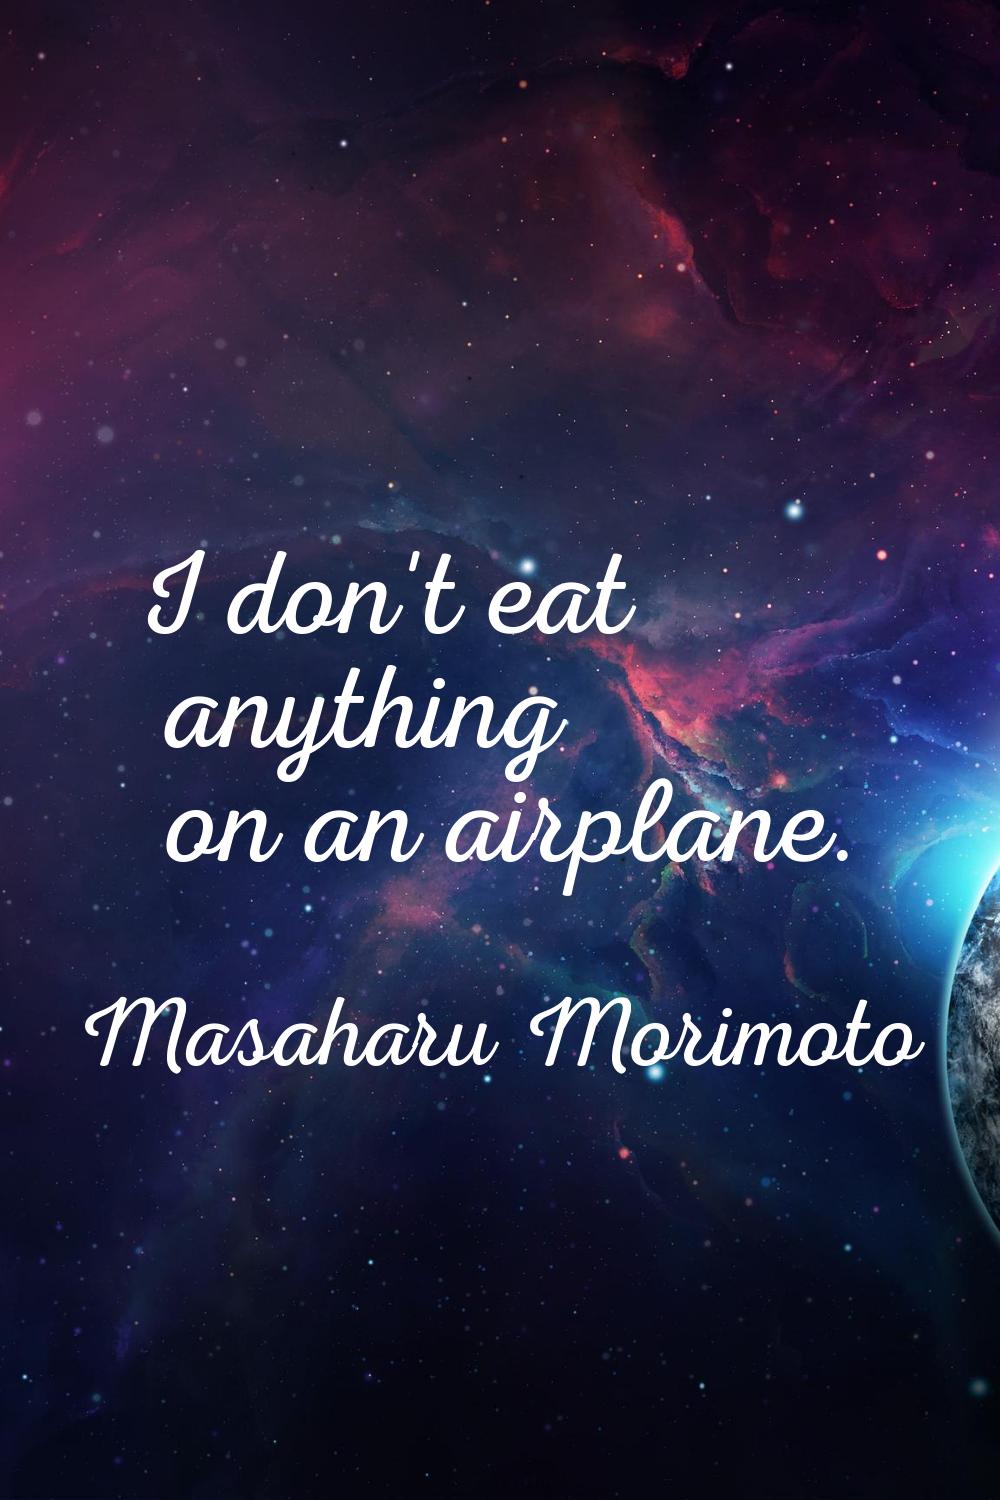 I don't eat anything on an airplane.